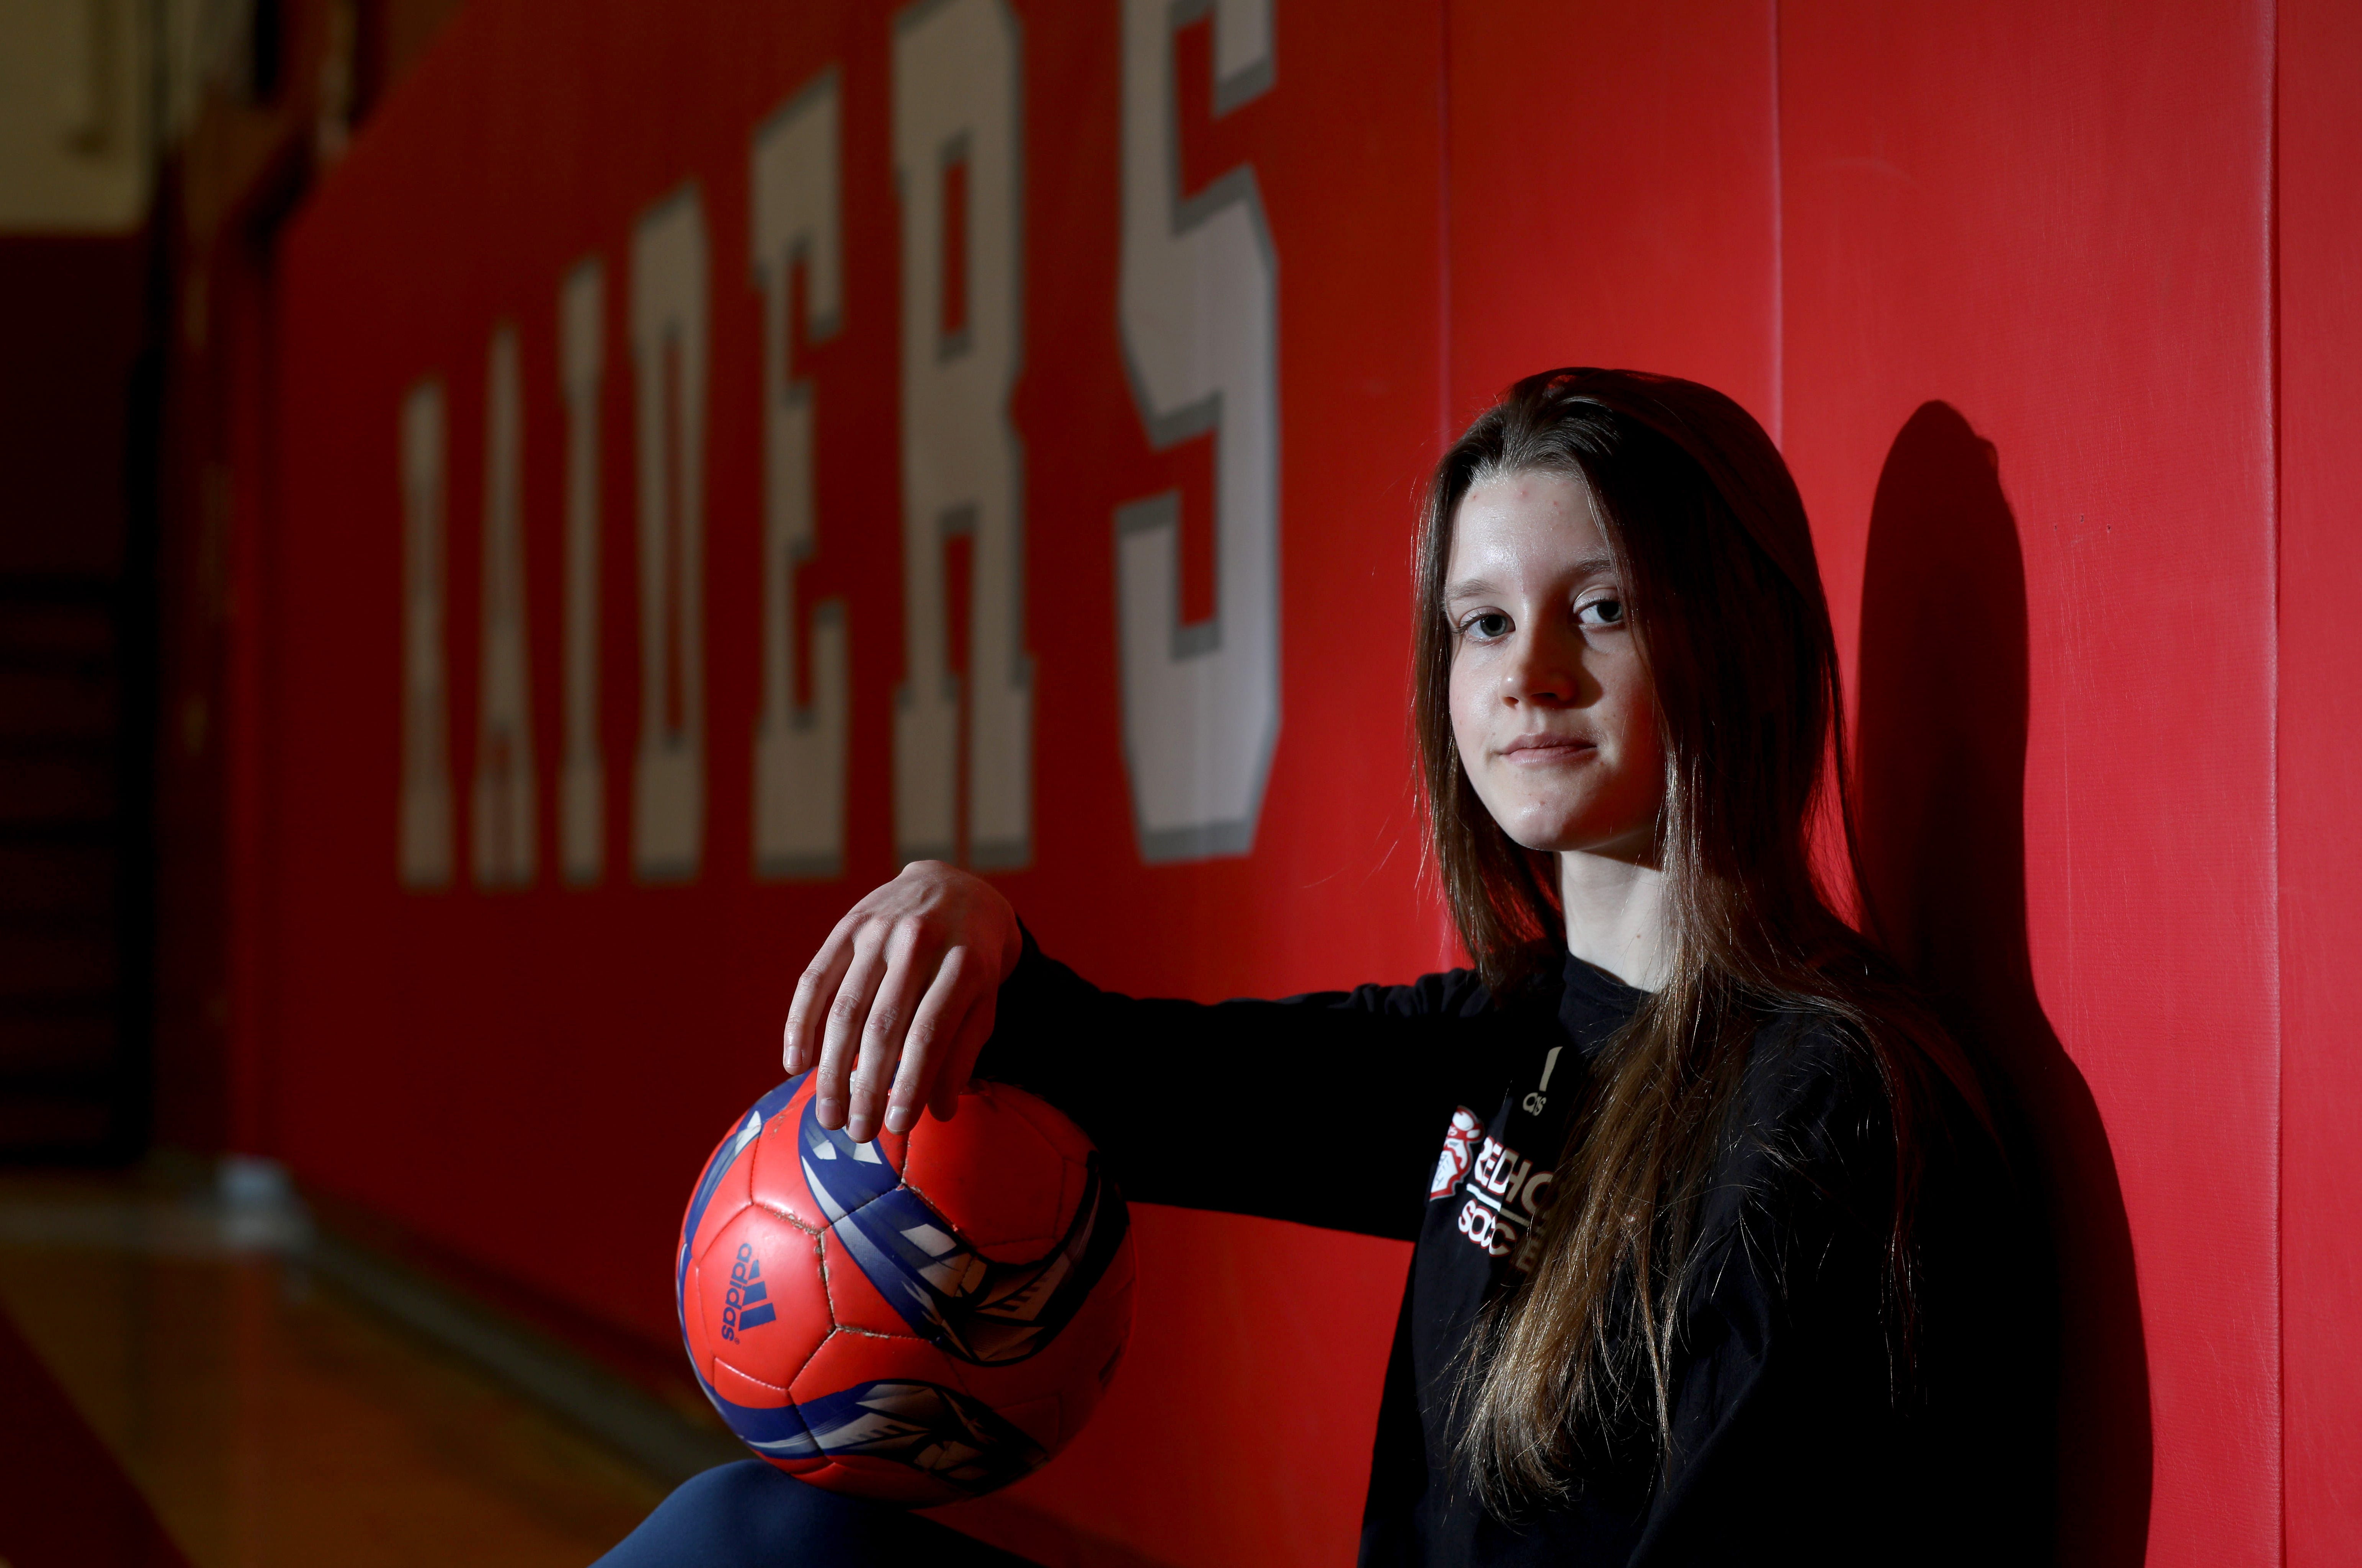 Tessa Husted, 18, a senior soccer player at Red Hook High School, says that not being able to play soccer through the pandemic limited her college recruiting opportunities. After taking a gap semester offer next Fall, Husted, photographed Feb. 25, 2021, will be attending Middlebury College in Vermont starting next February, where she hopes to become a member of the soccer team.